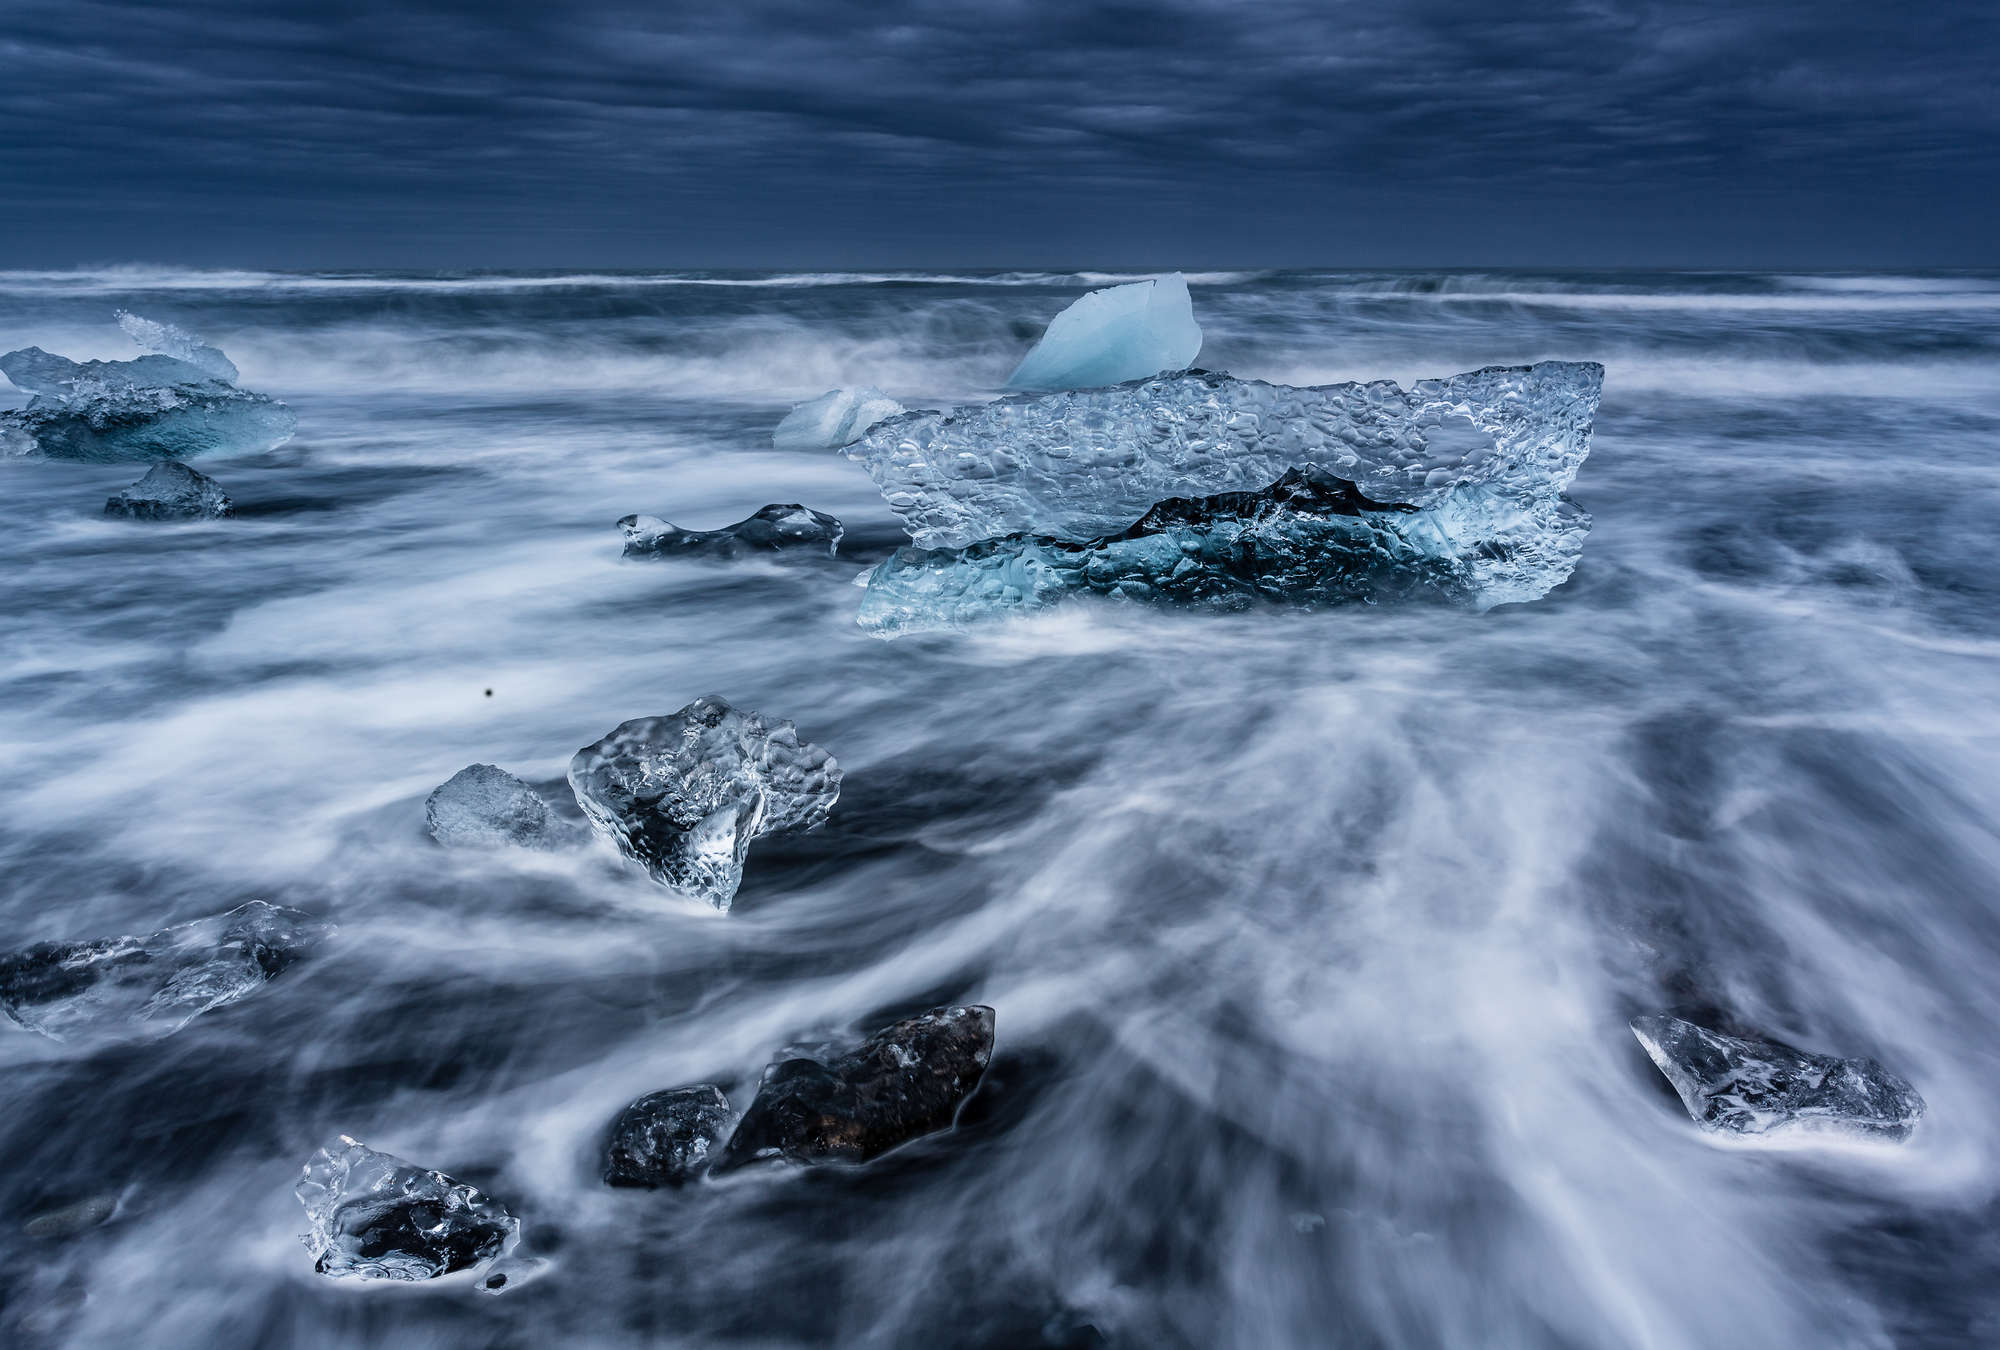             Photo wallpaper mystic ice floes
        